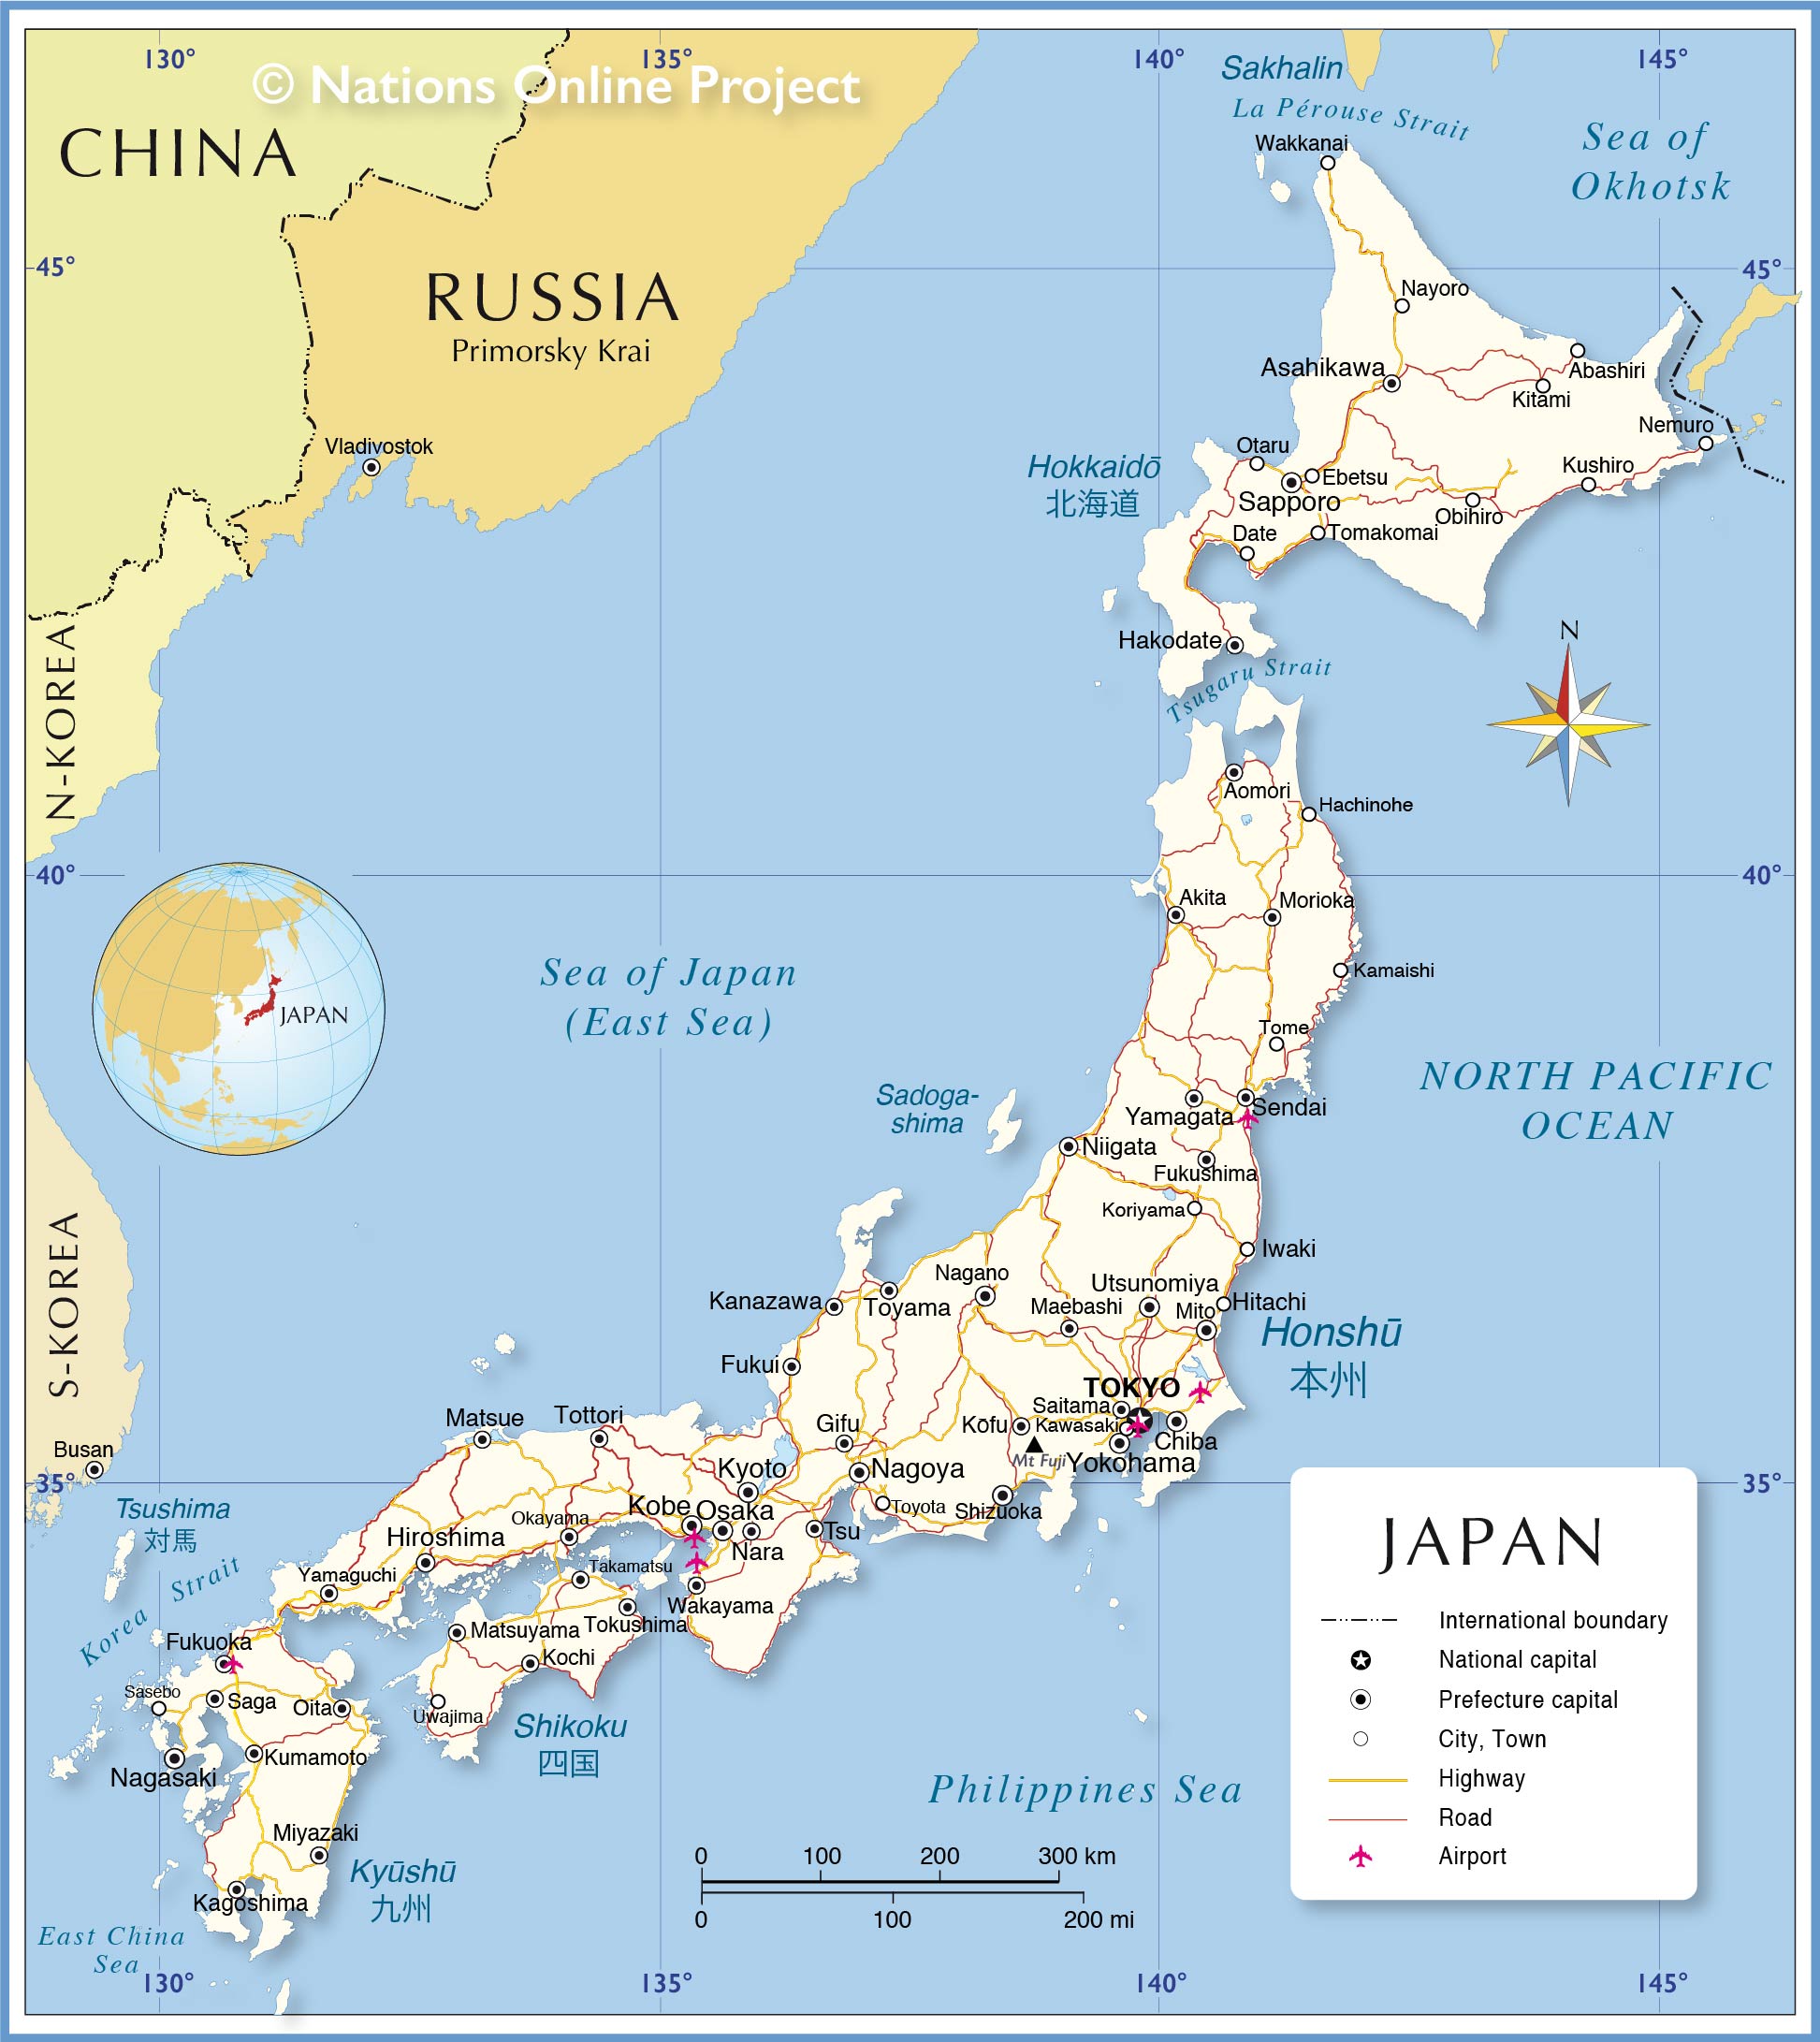 political-map-of-japan-nations-online-project